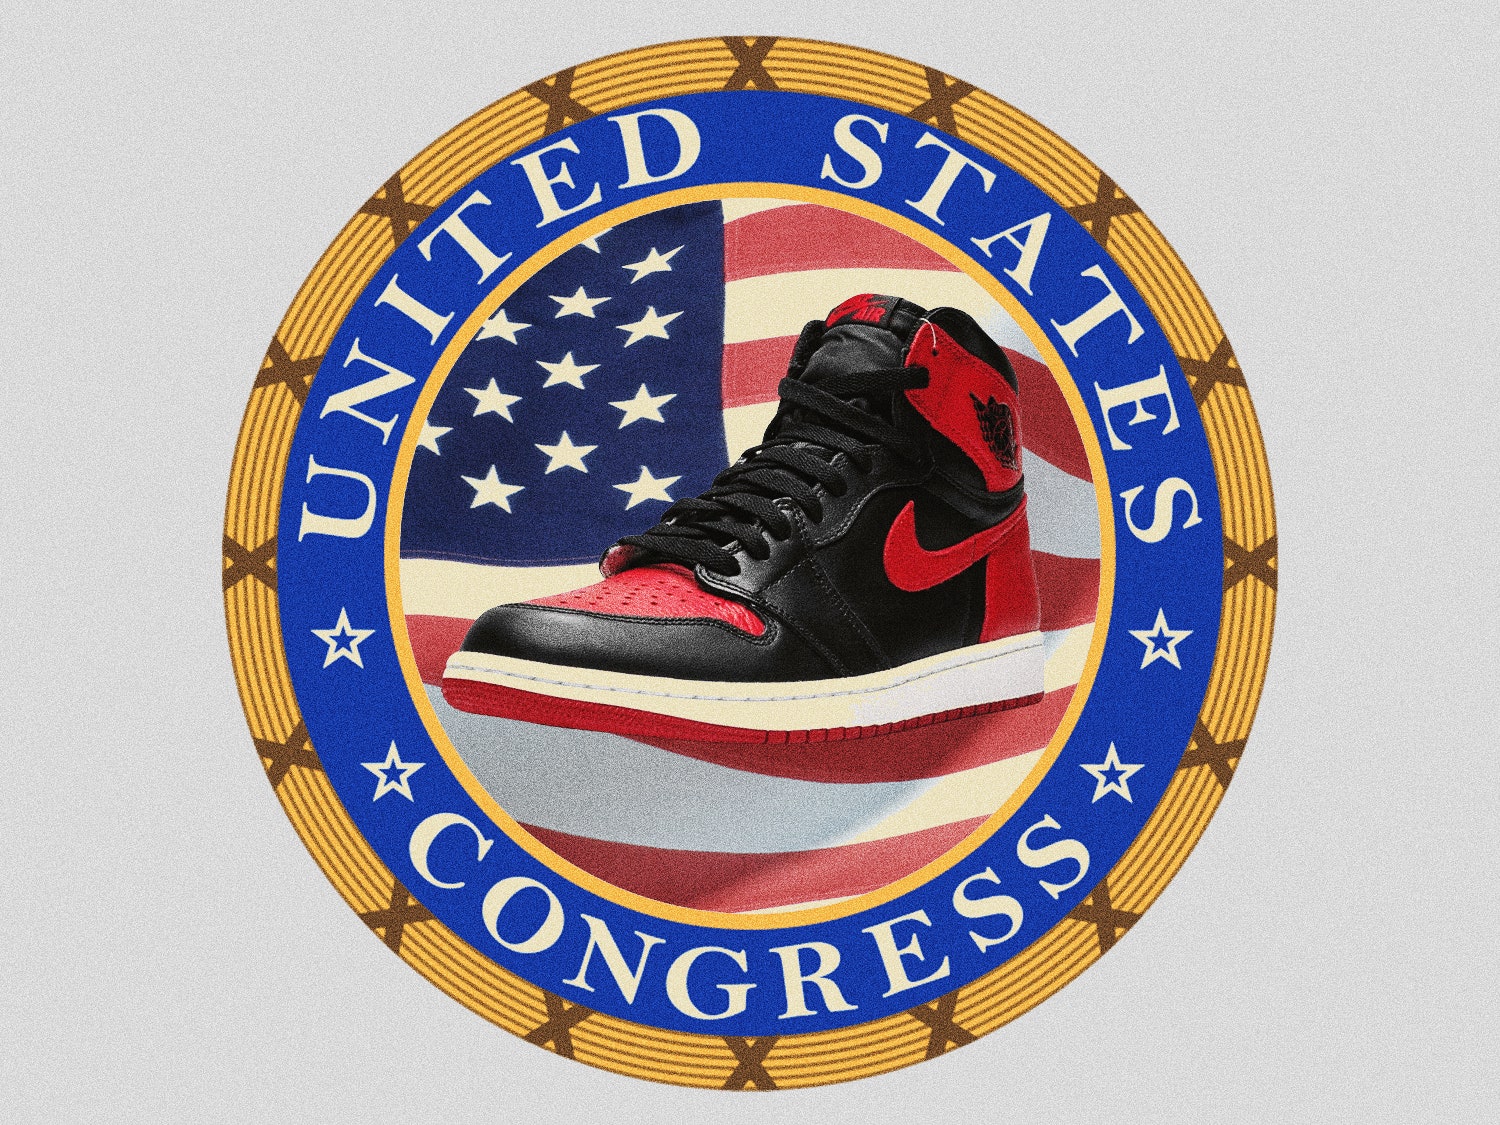 The Sneakerhead Congressman Is Battling for the Sole of the Nation